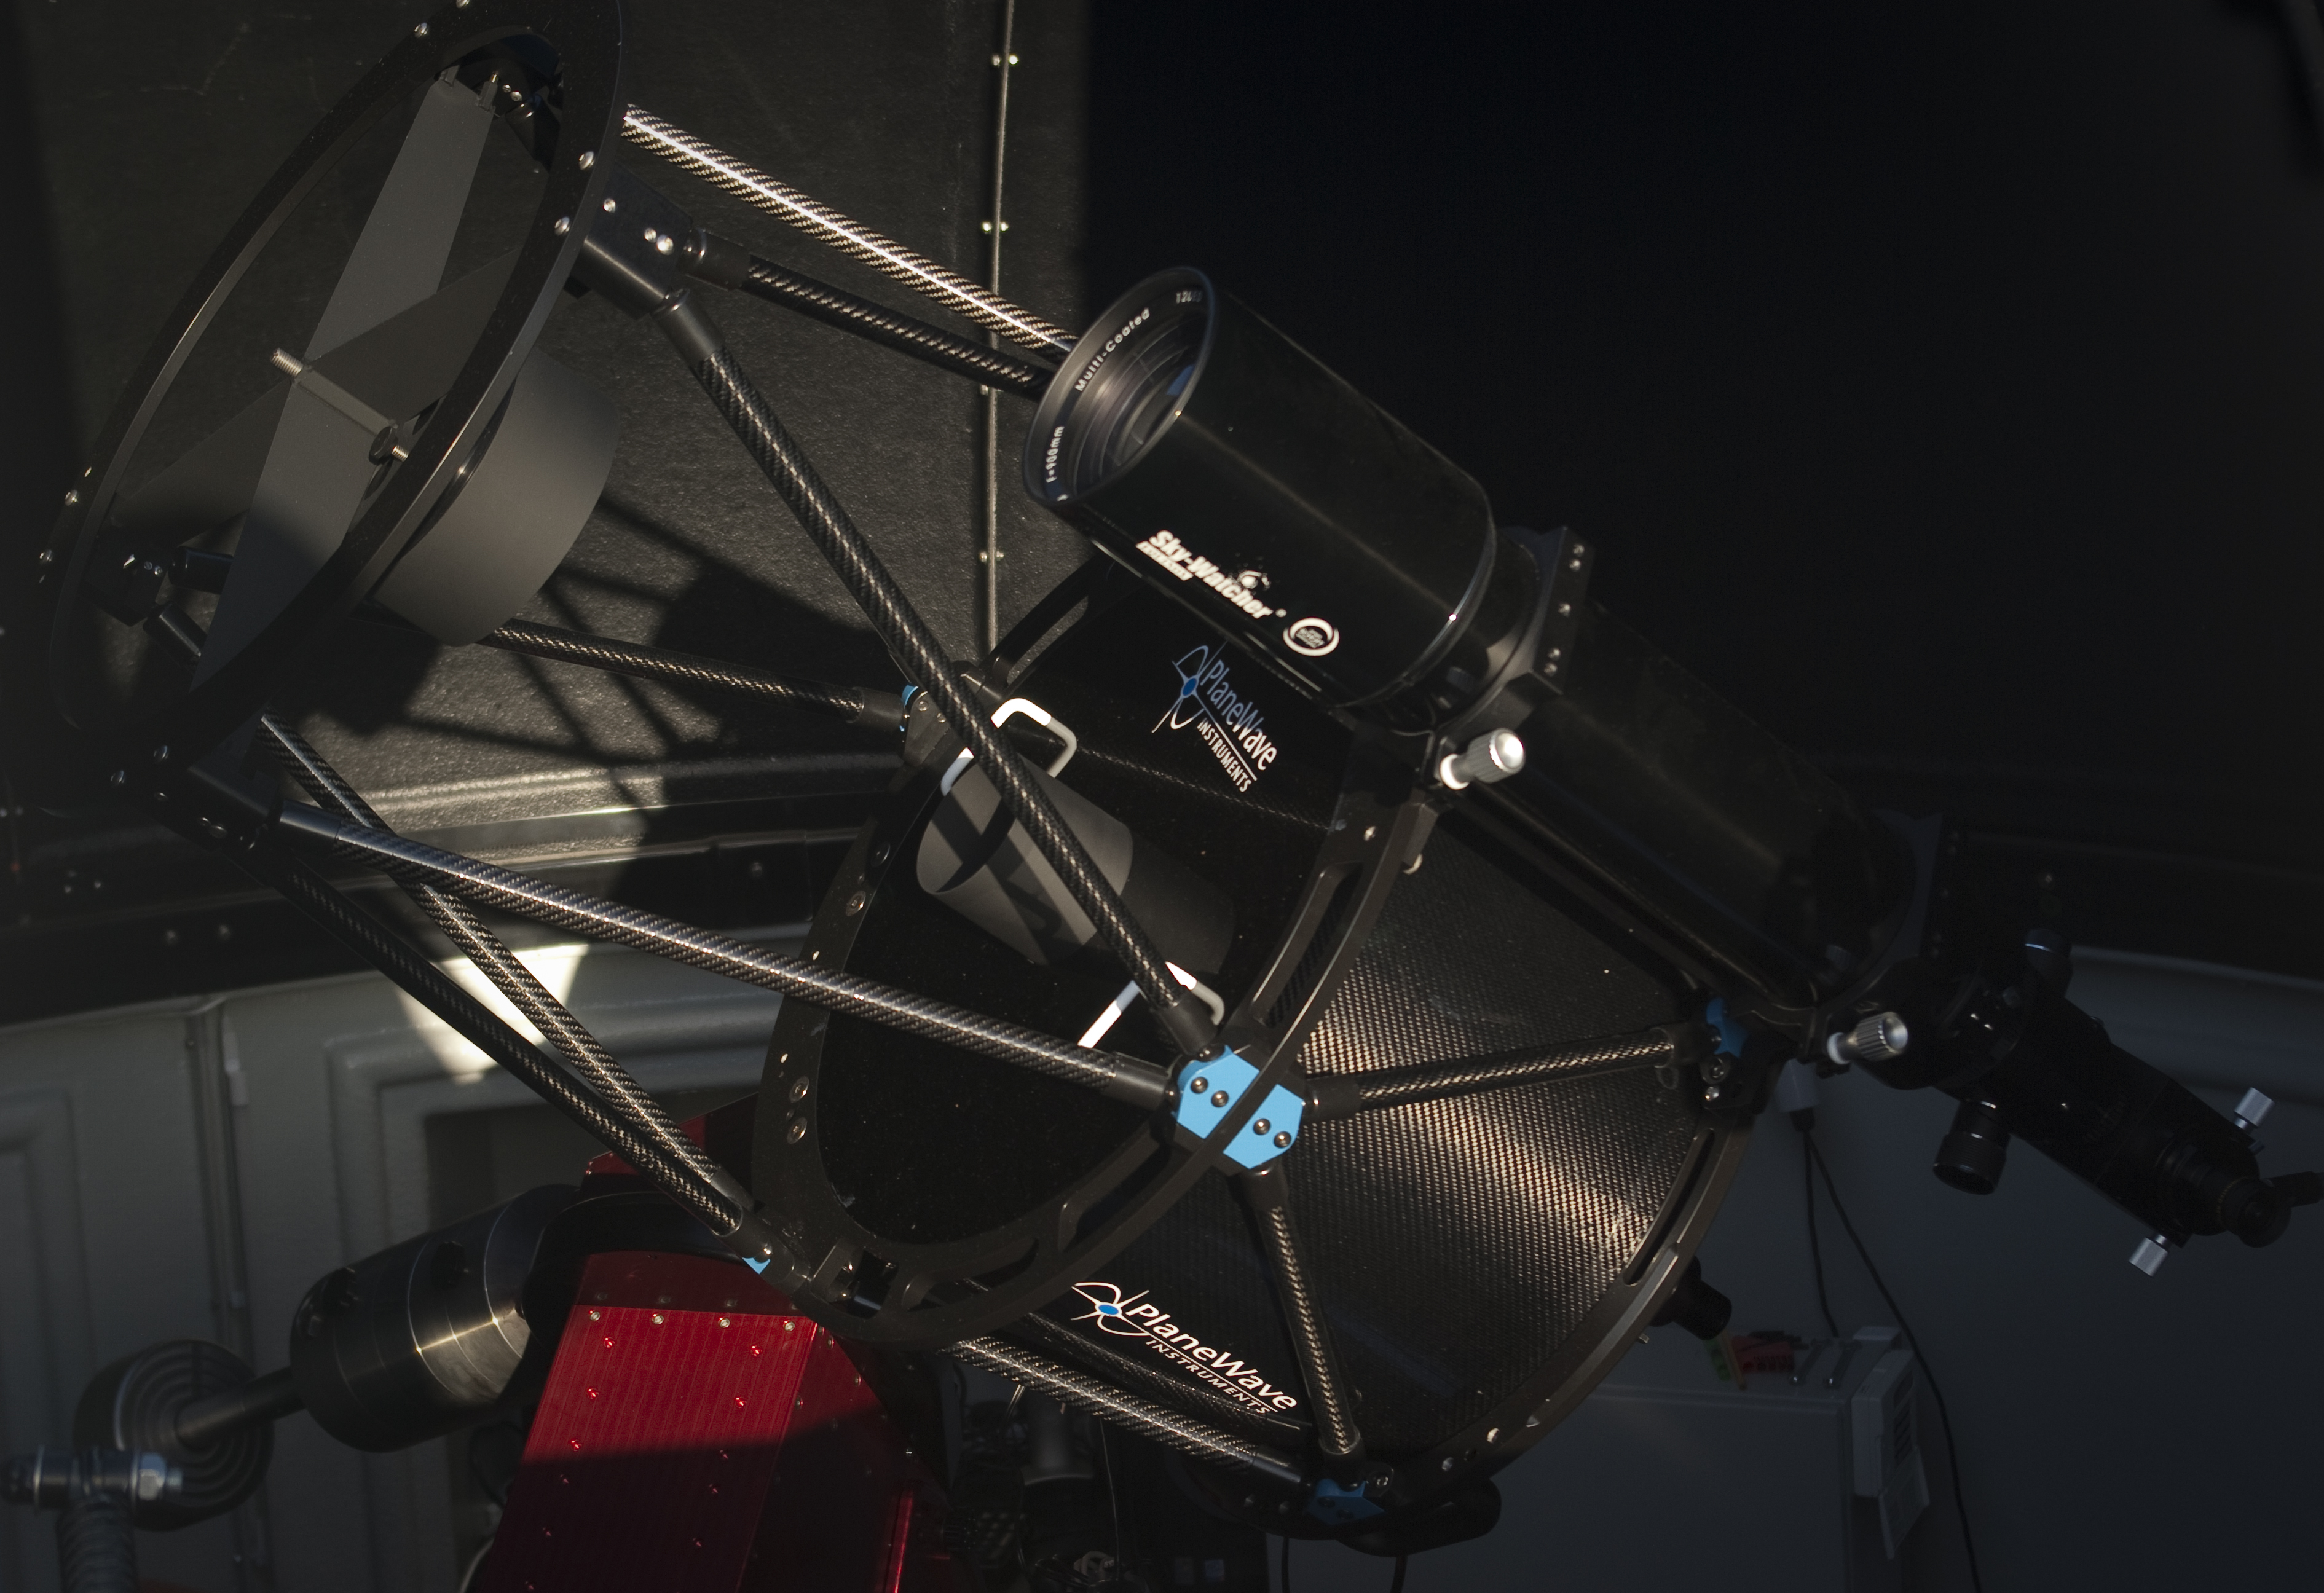 The Armagh Robotic telescope is a 17\" reflecting telescope